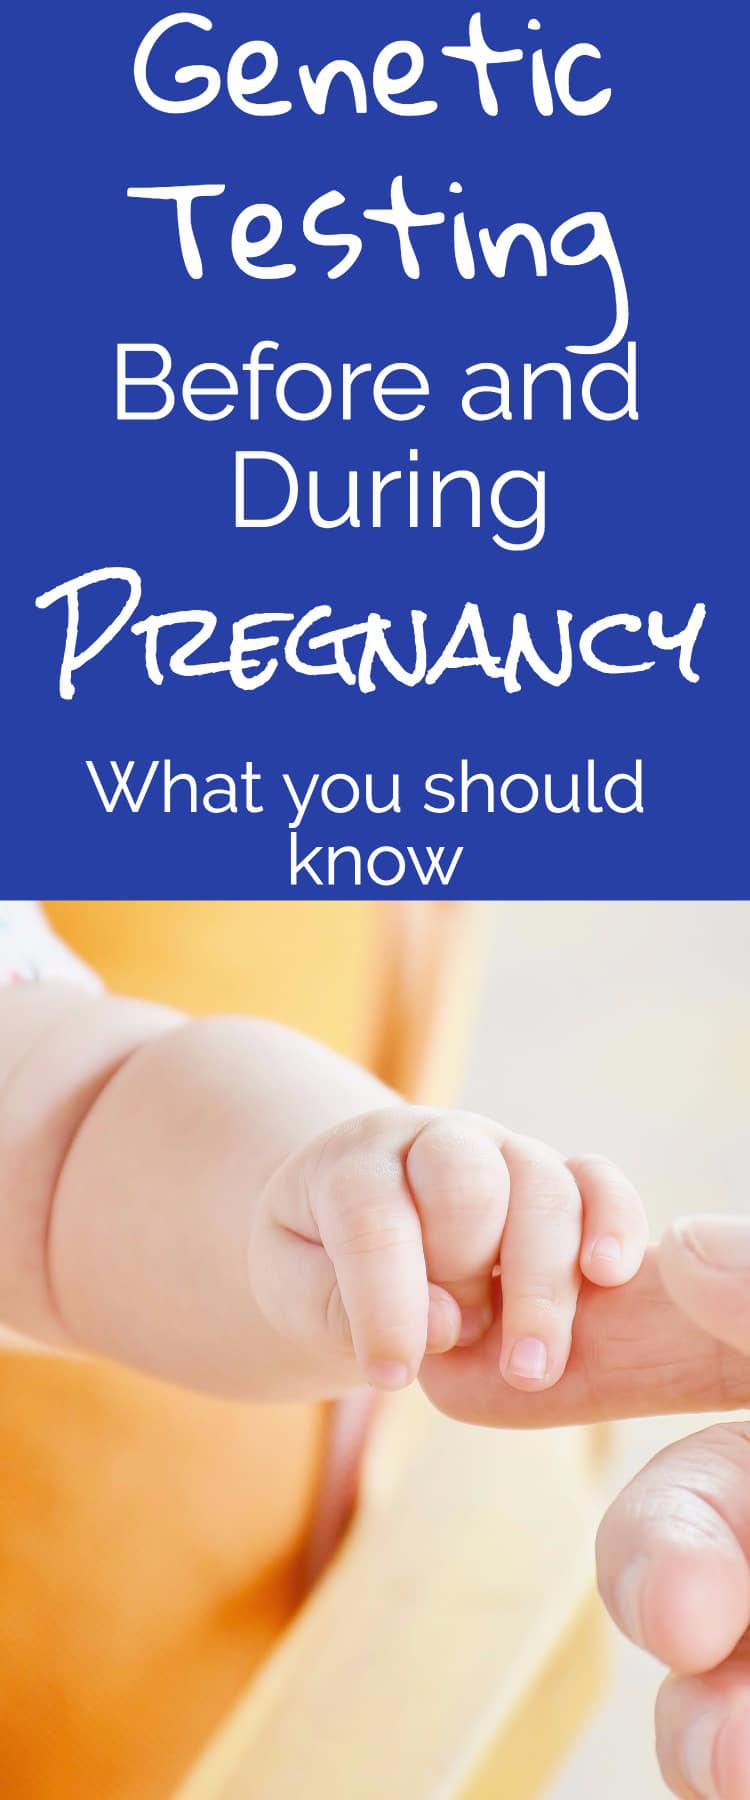 Pregnancy / Pregnancy Tips / PRegnancy Advice / Pre-conception / Conception / Baby / Genetic Testing